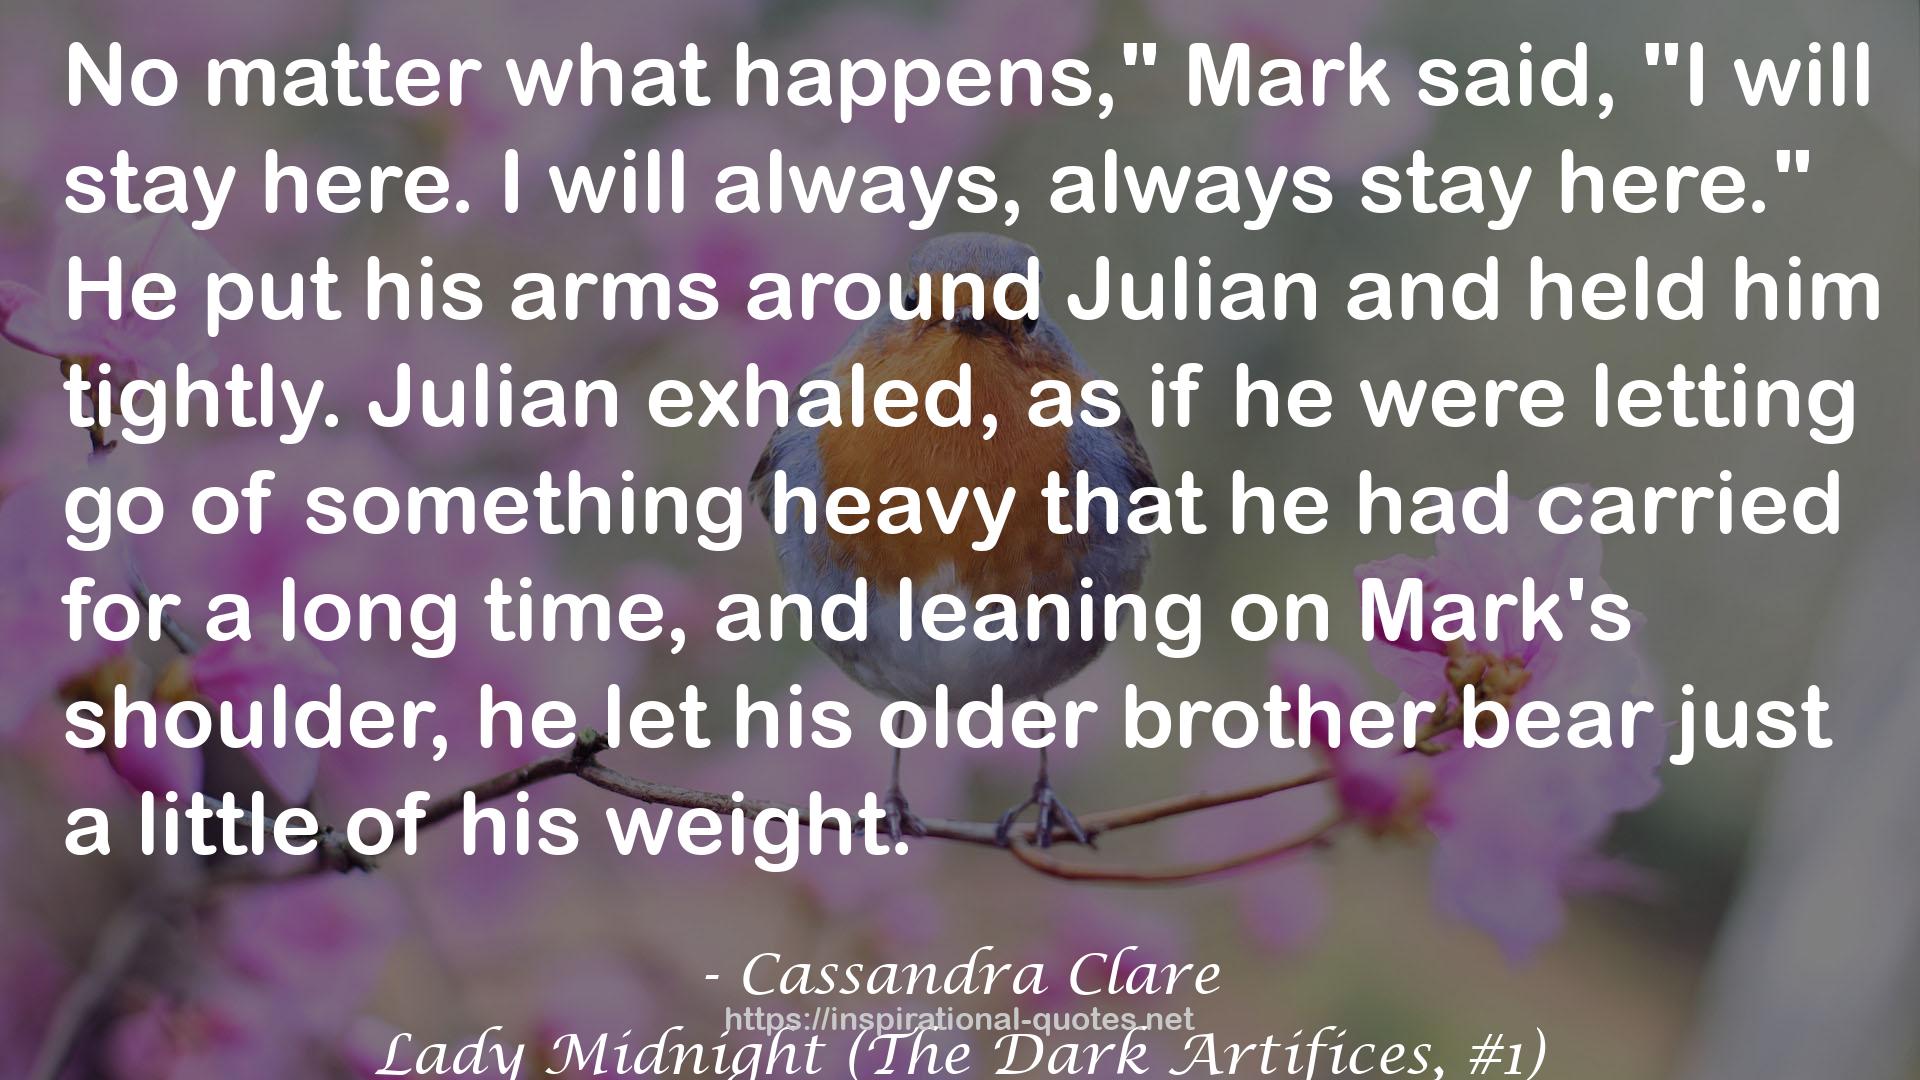 Lady Midnight (The Dark Artifices, #1) QUOTES